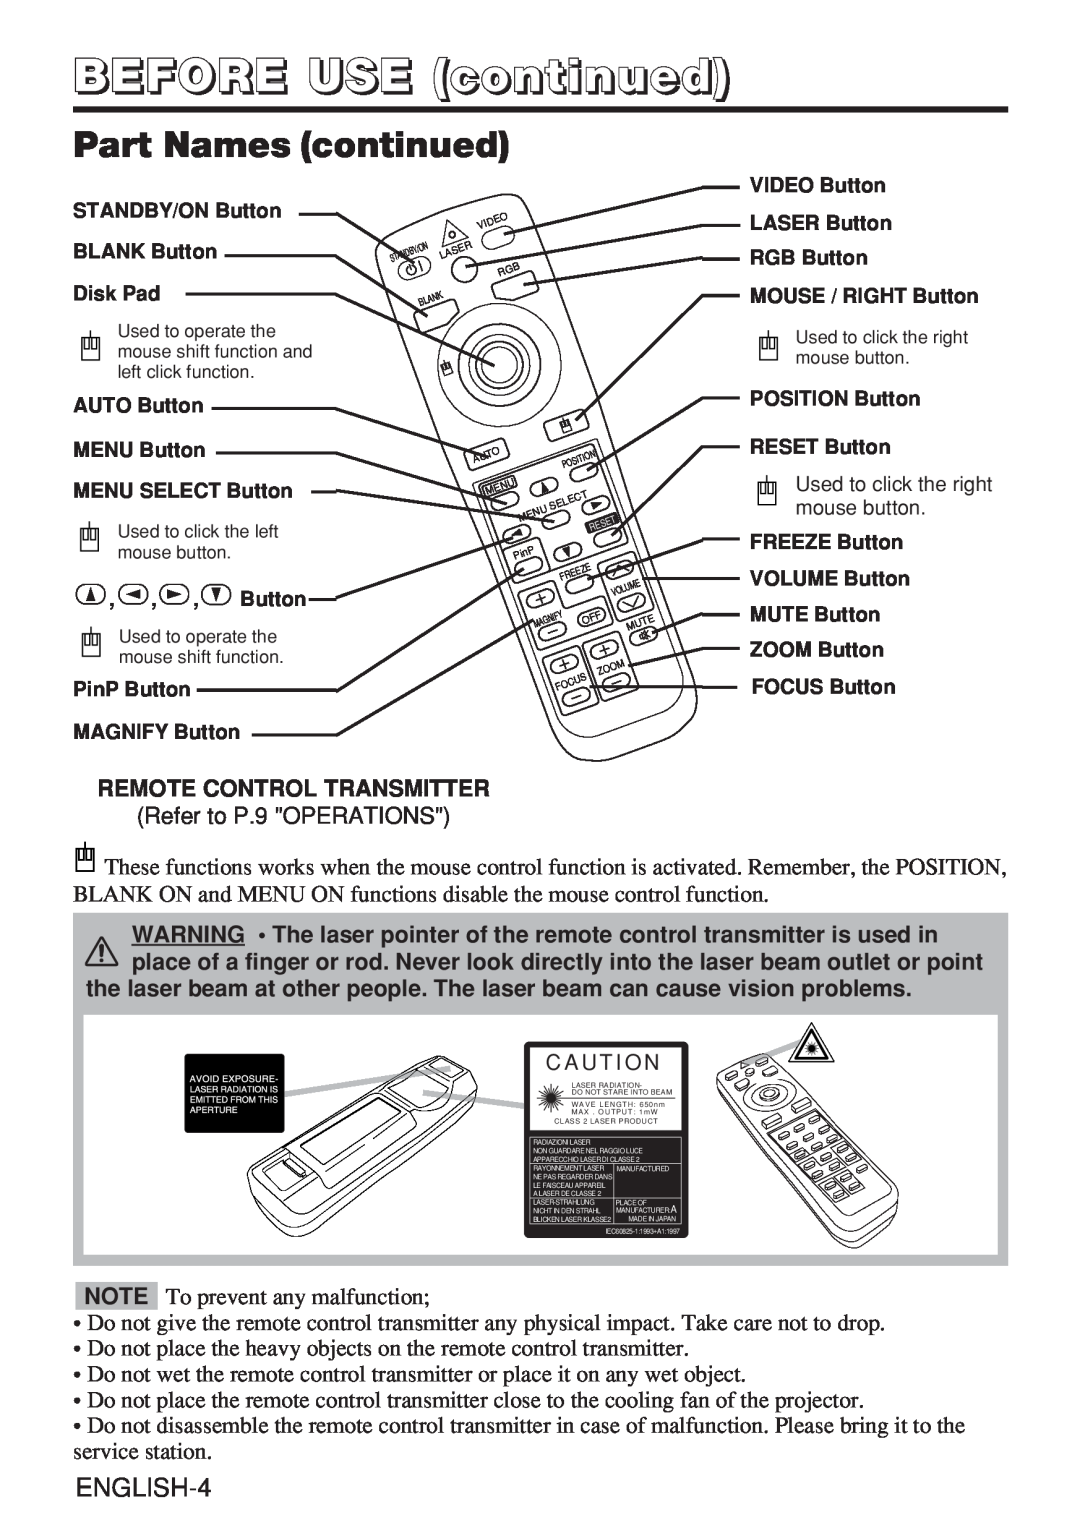 Hitachi CP-X980W user manual Part Names continued, BEFORE USE continued, ENGLISH-4 